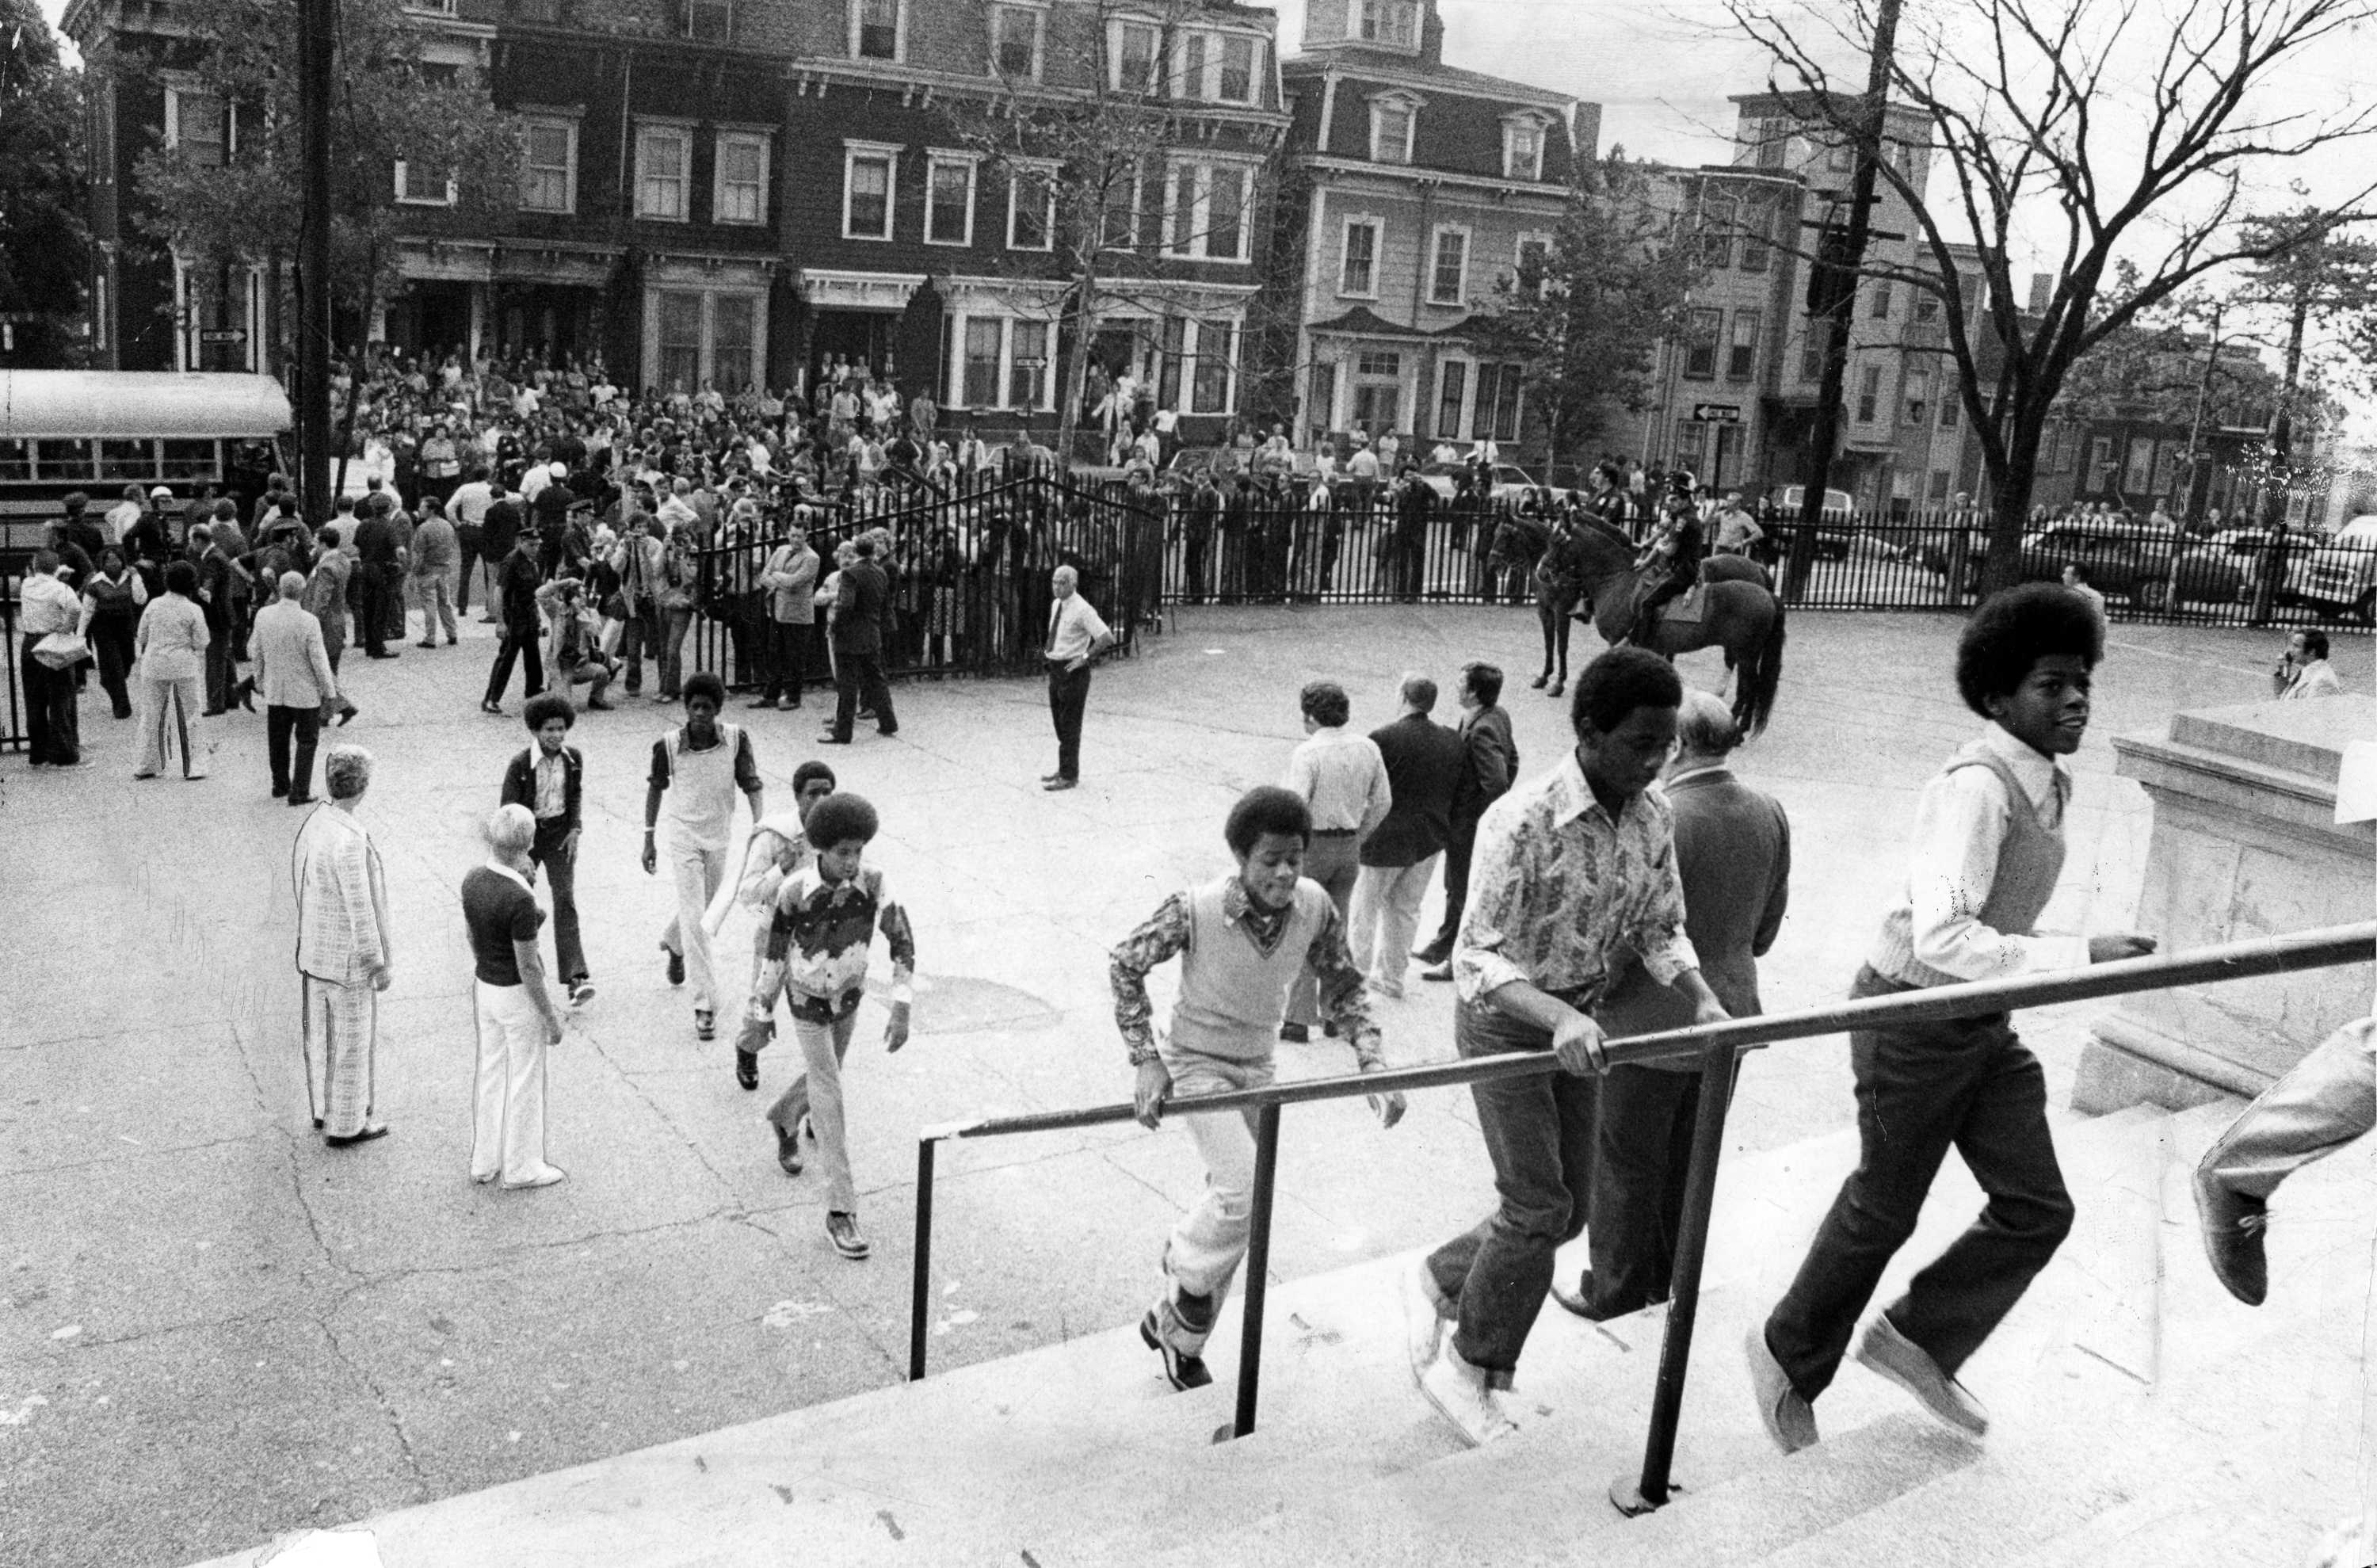 Students enter a South Boston school on the first day of court-ordered busing, imposed to desegregate schools, in 1974